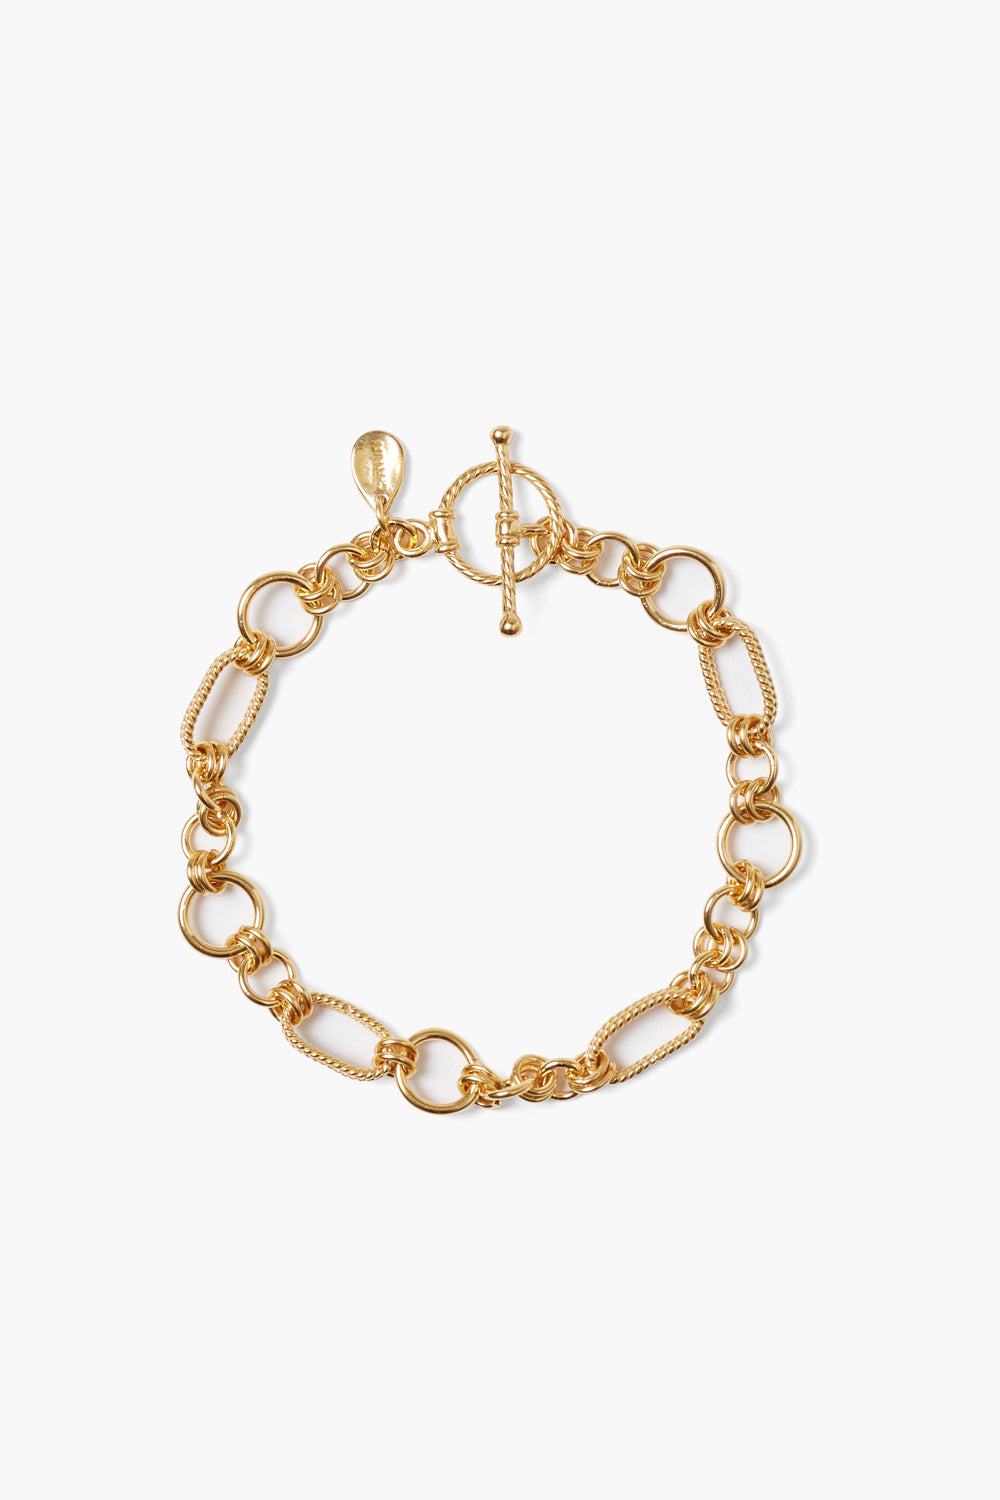 YELLOW GOLD TEXTURED LINKS BRACELET - Kingfisher Road - Online Boutique